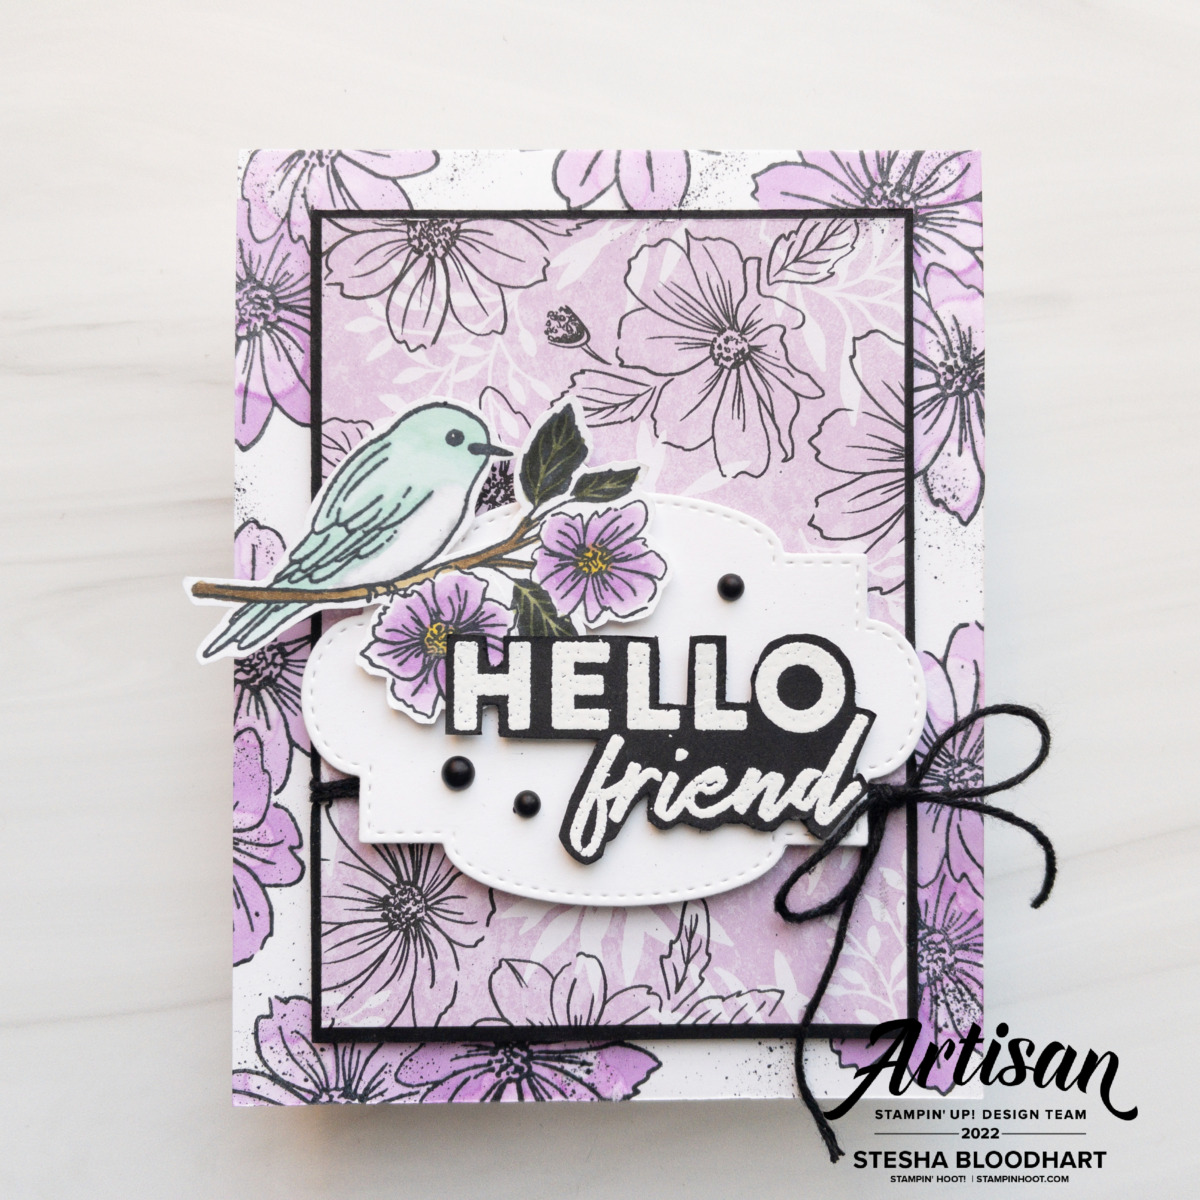 Friendly Hello Stamp Set & Friendly Hello Designer Series Paper Bundle by Stampin' Up! Free with $100 Stesha Bloodhart, Stampin ' Hoot!